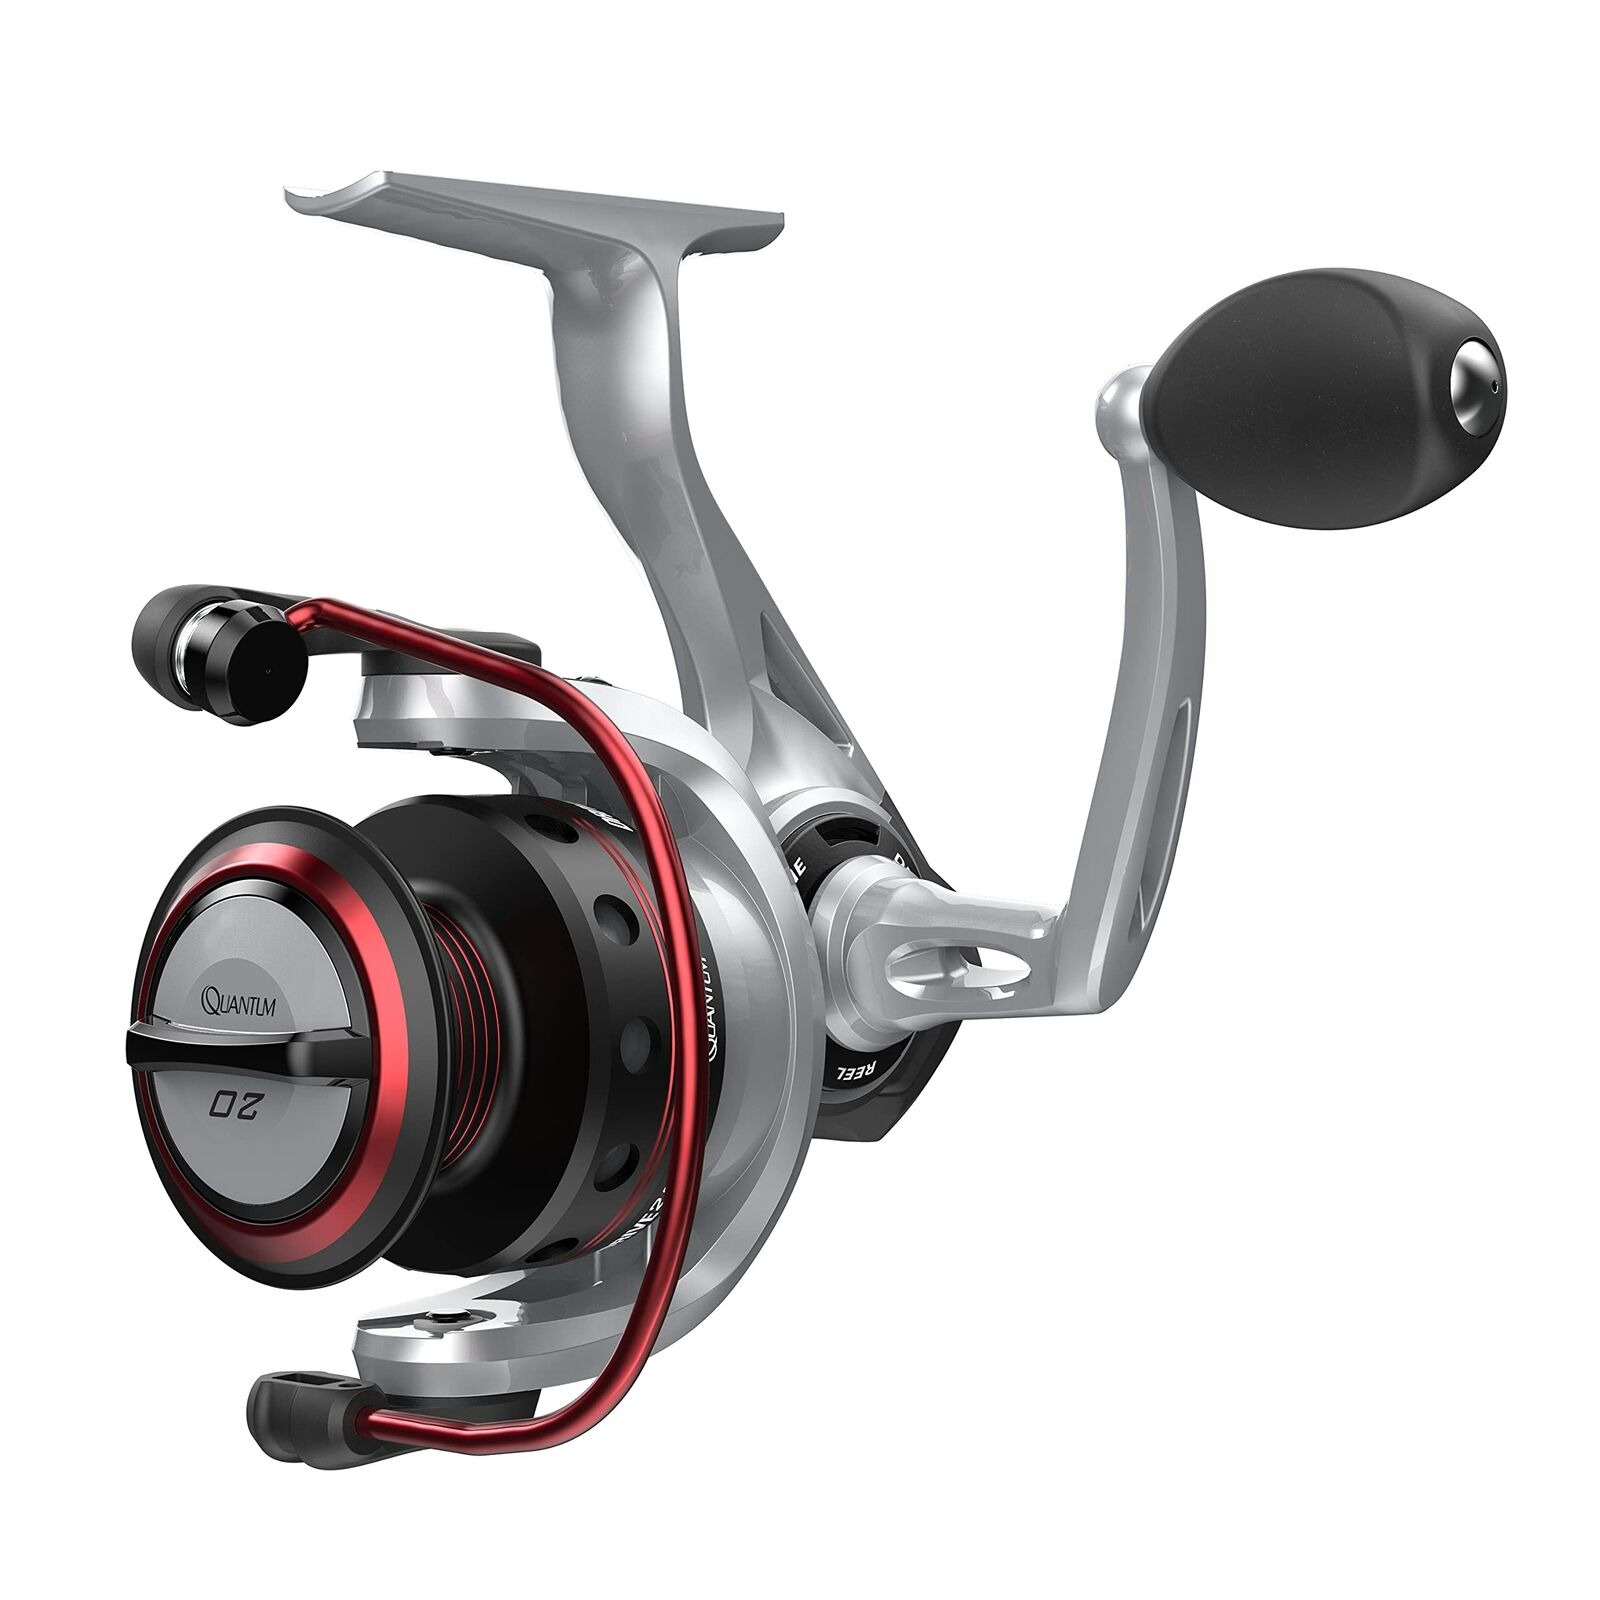 Quantum Drive Spinning Reel, Continuous Anti-Reverse Fishing Reel with Smooth...